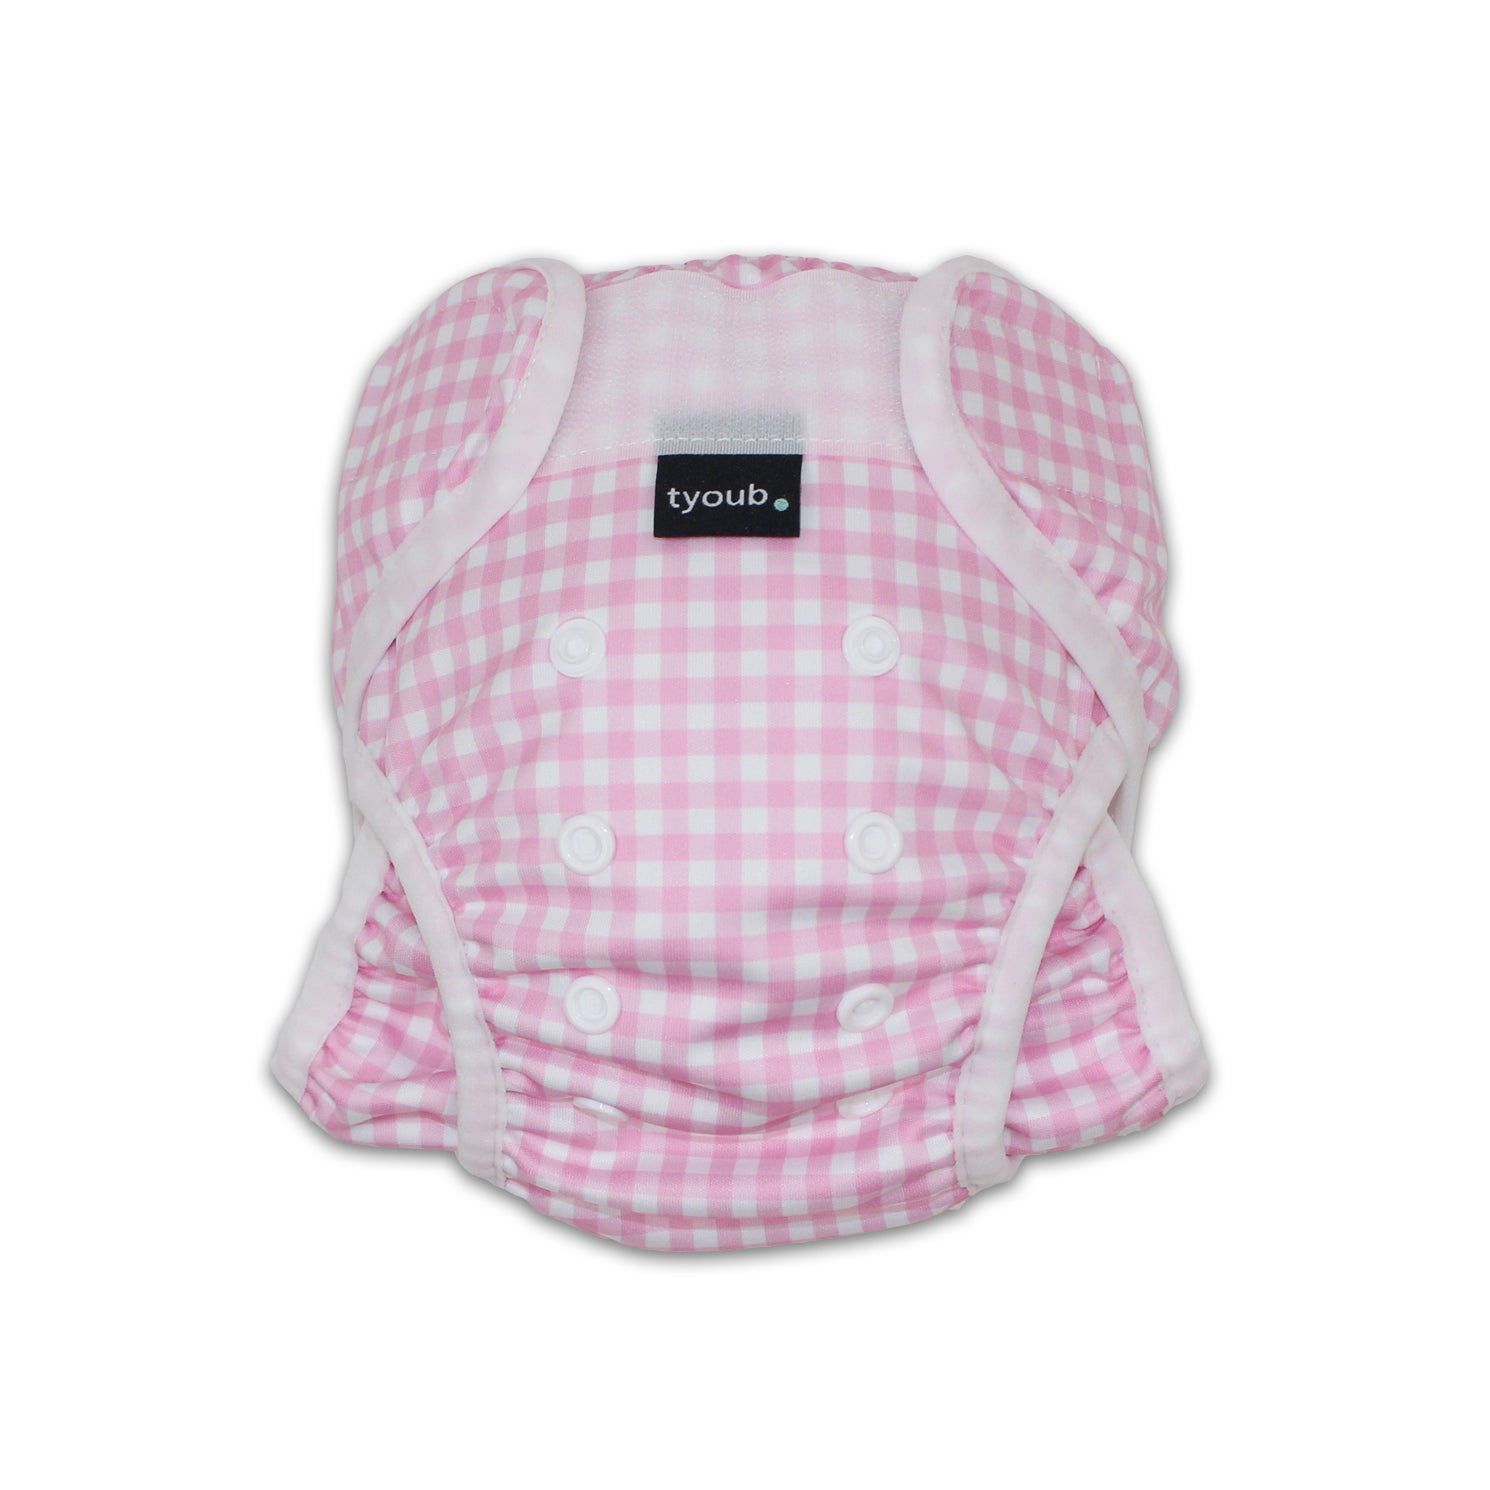 As seen on Chemist Warehouse. Tyoub Reusable and Adjustable Swim Nappy. The Reusable Swim Nappy and Wet Bag in the colour black and white Gingham Check is Excellent for swimming lessons and all aquatic play. This swim nappy fits all babies from 3 months to 3 years old. With double inner leg gusset, it is leak and accident proof. Has a Snug fit and soft elastic seams. With no gaps, the exact waistband fit with soft VELCRO tabs. Made in quick dry fabric.